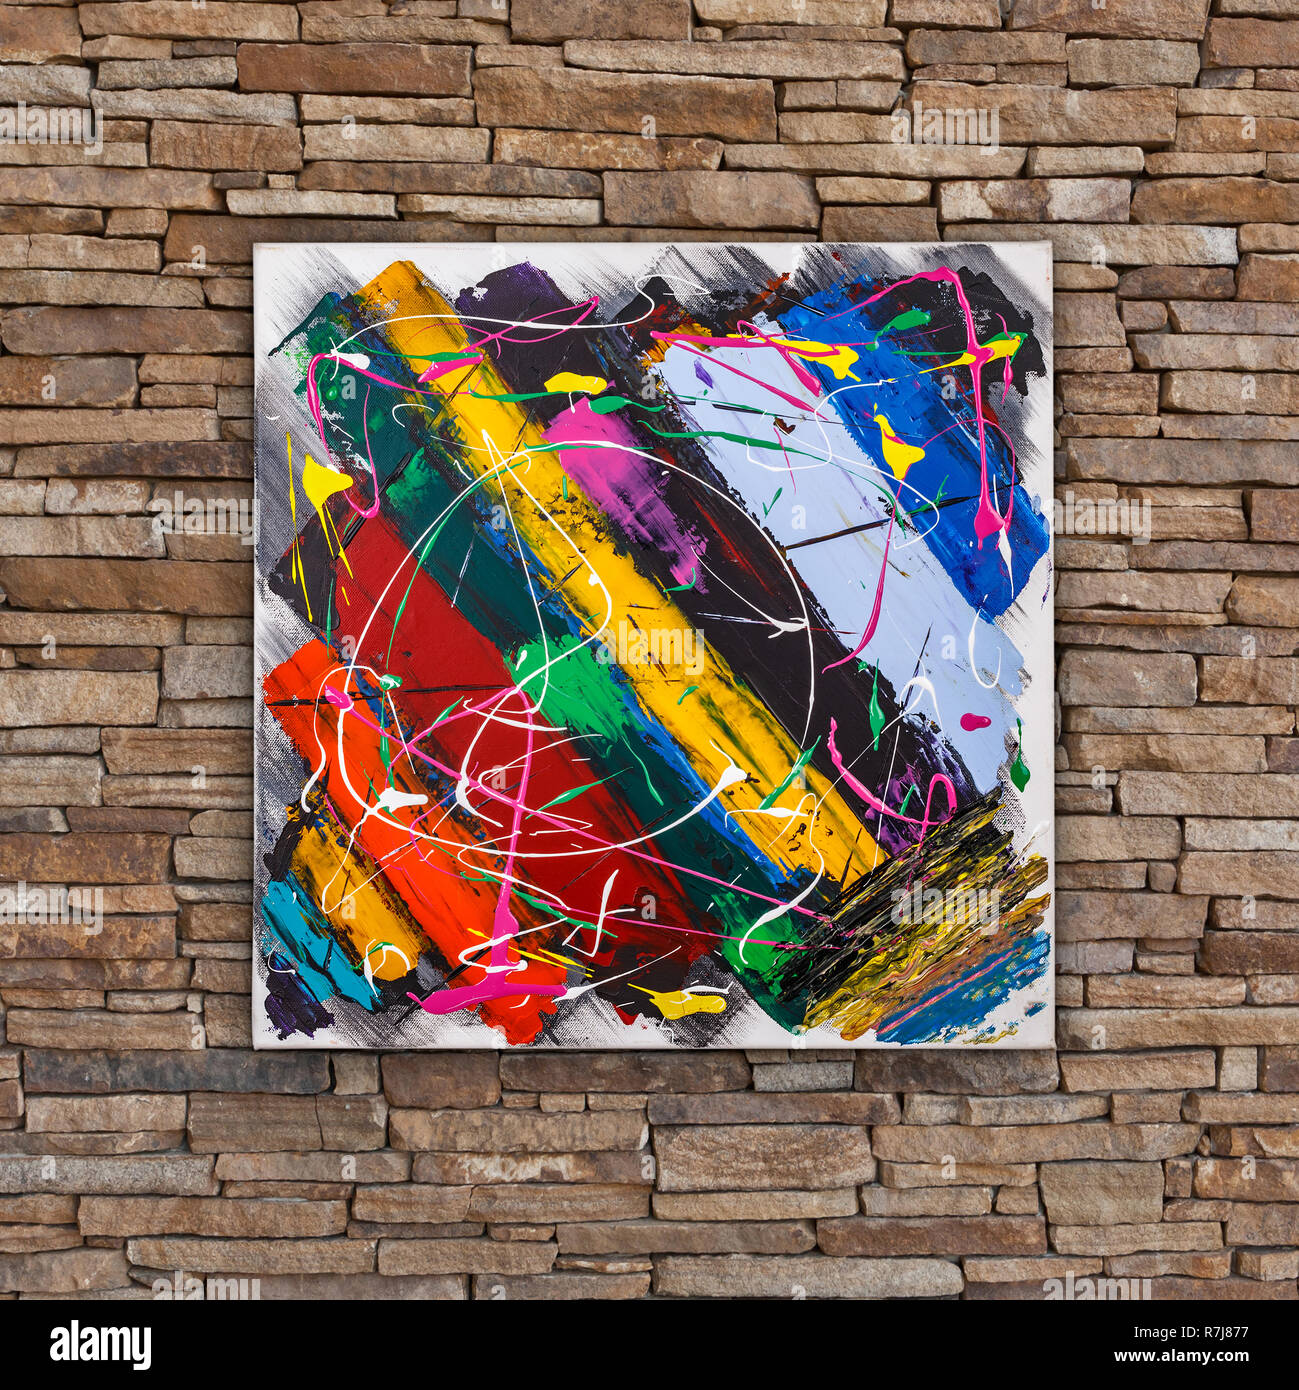 Abstract colorful oil painting, brush stripes and splashes, painted by Attila Hajnal, hanging on stone wall Stock Photo